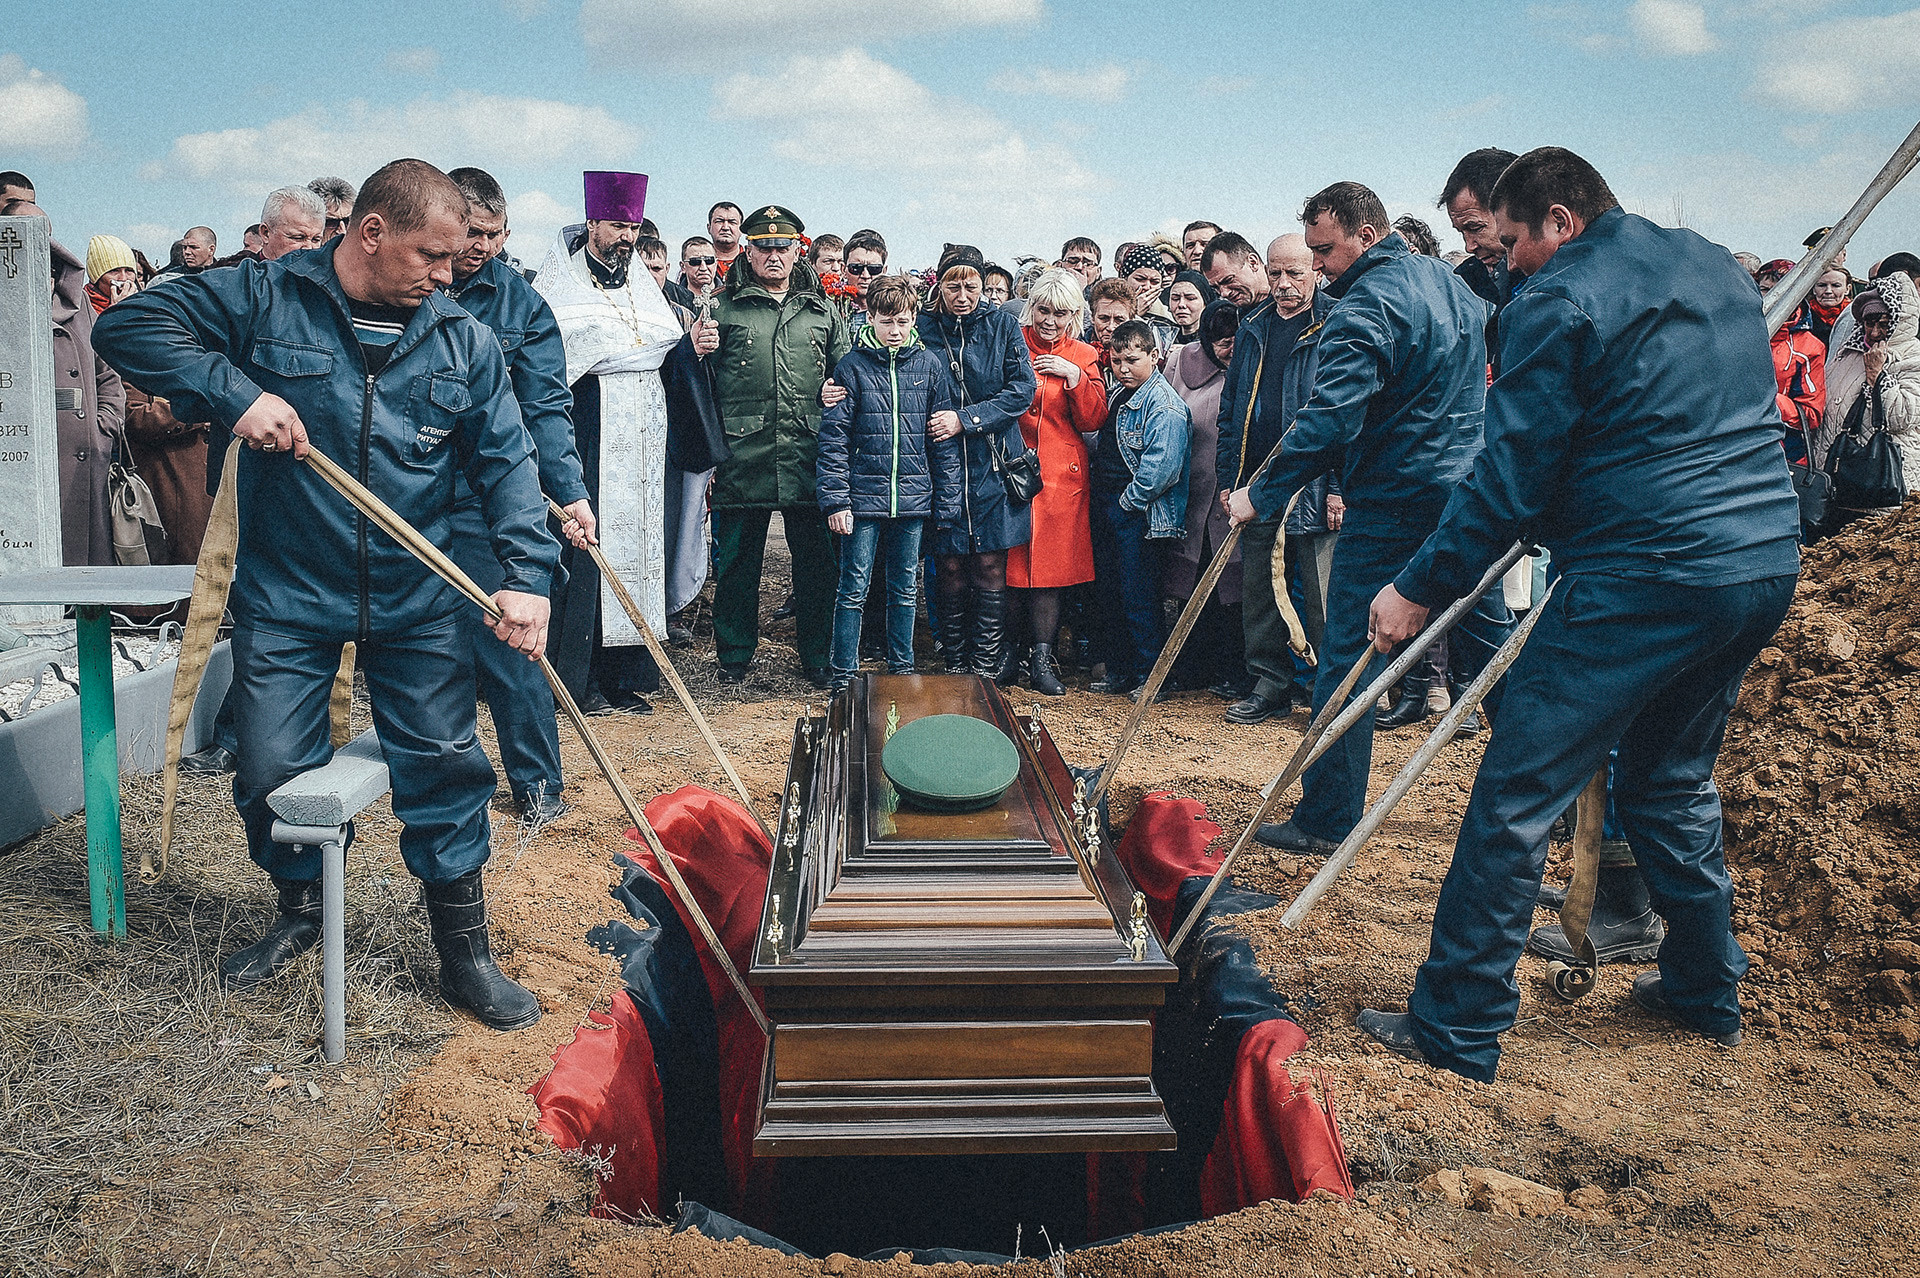 Burial of a military man